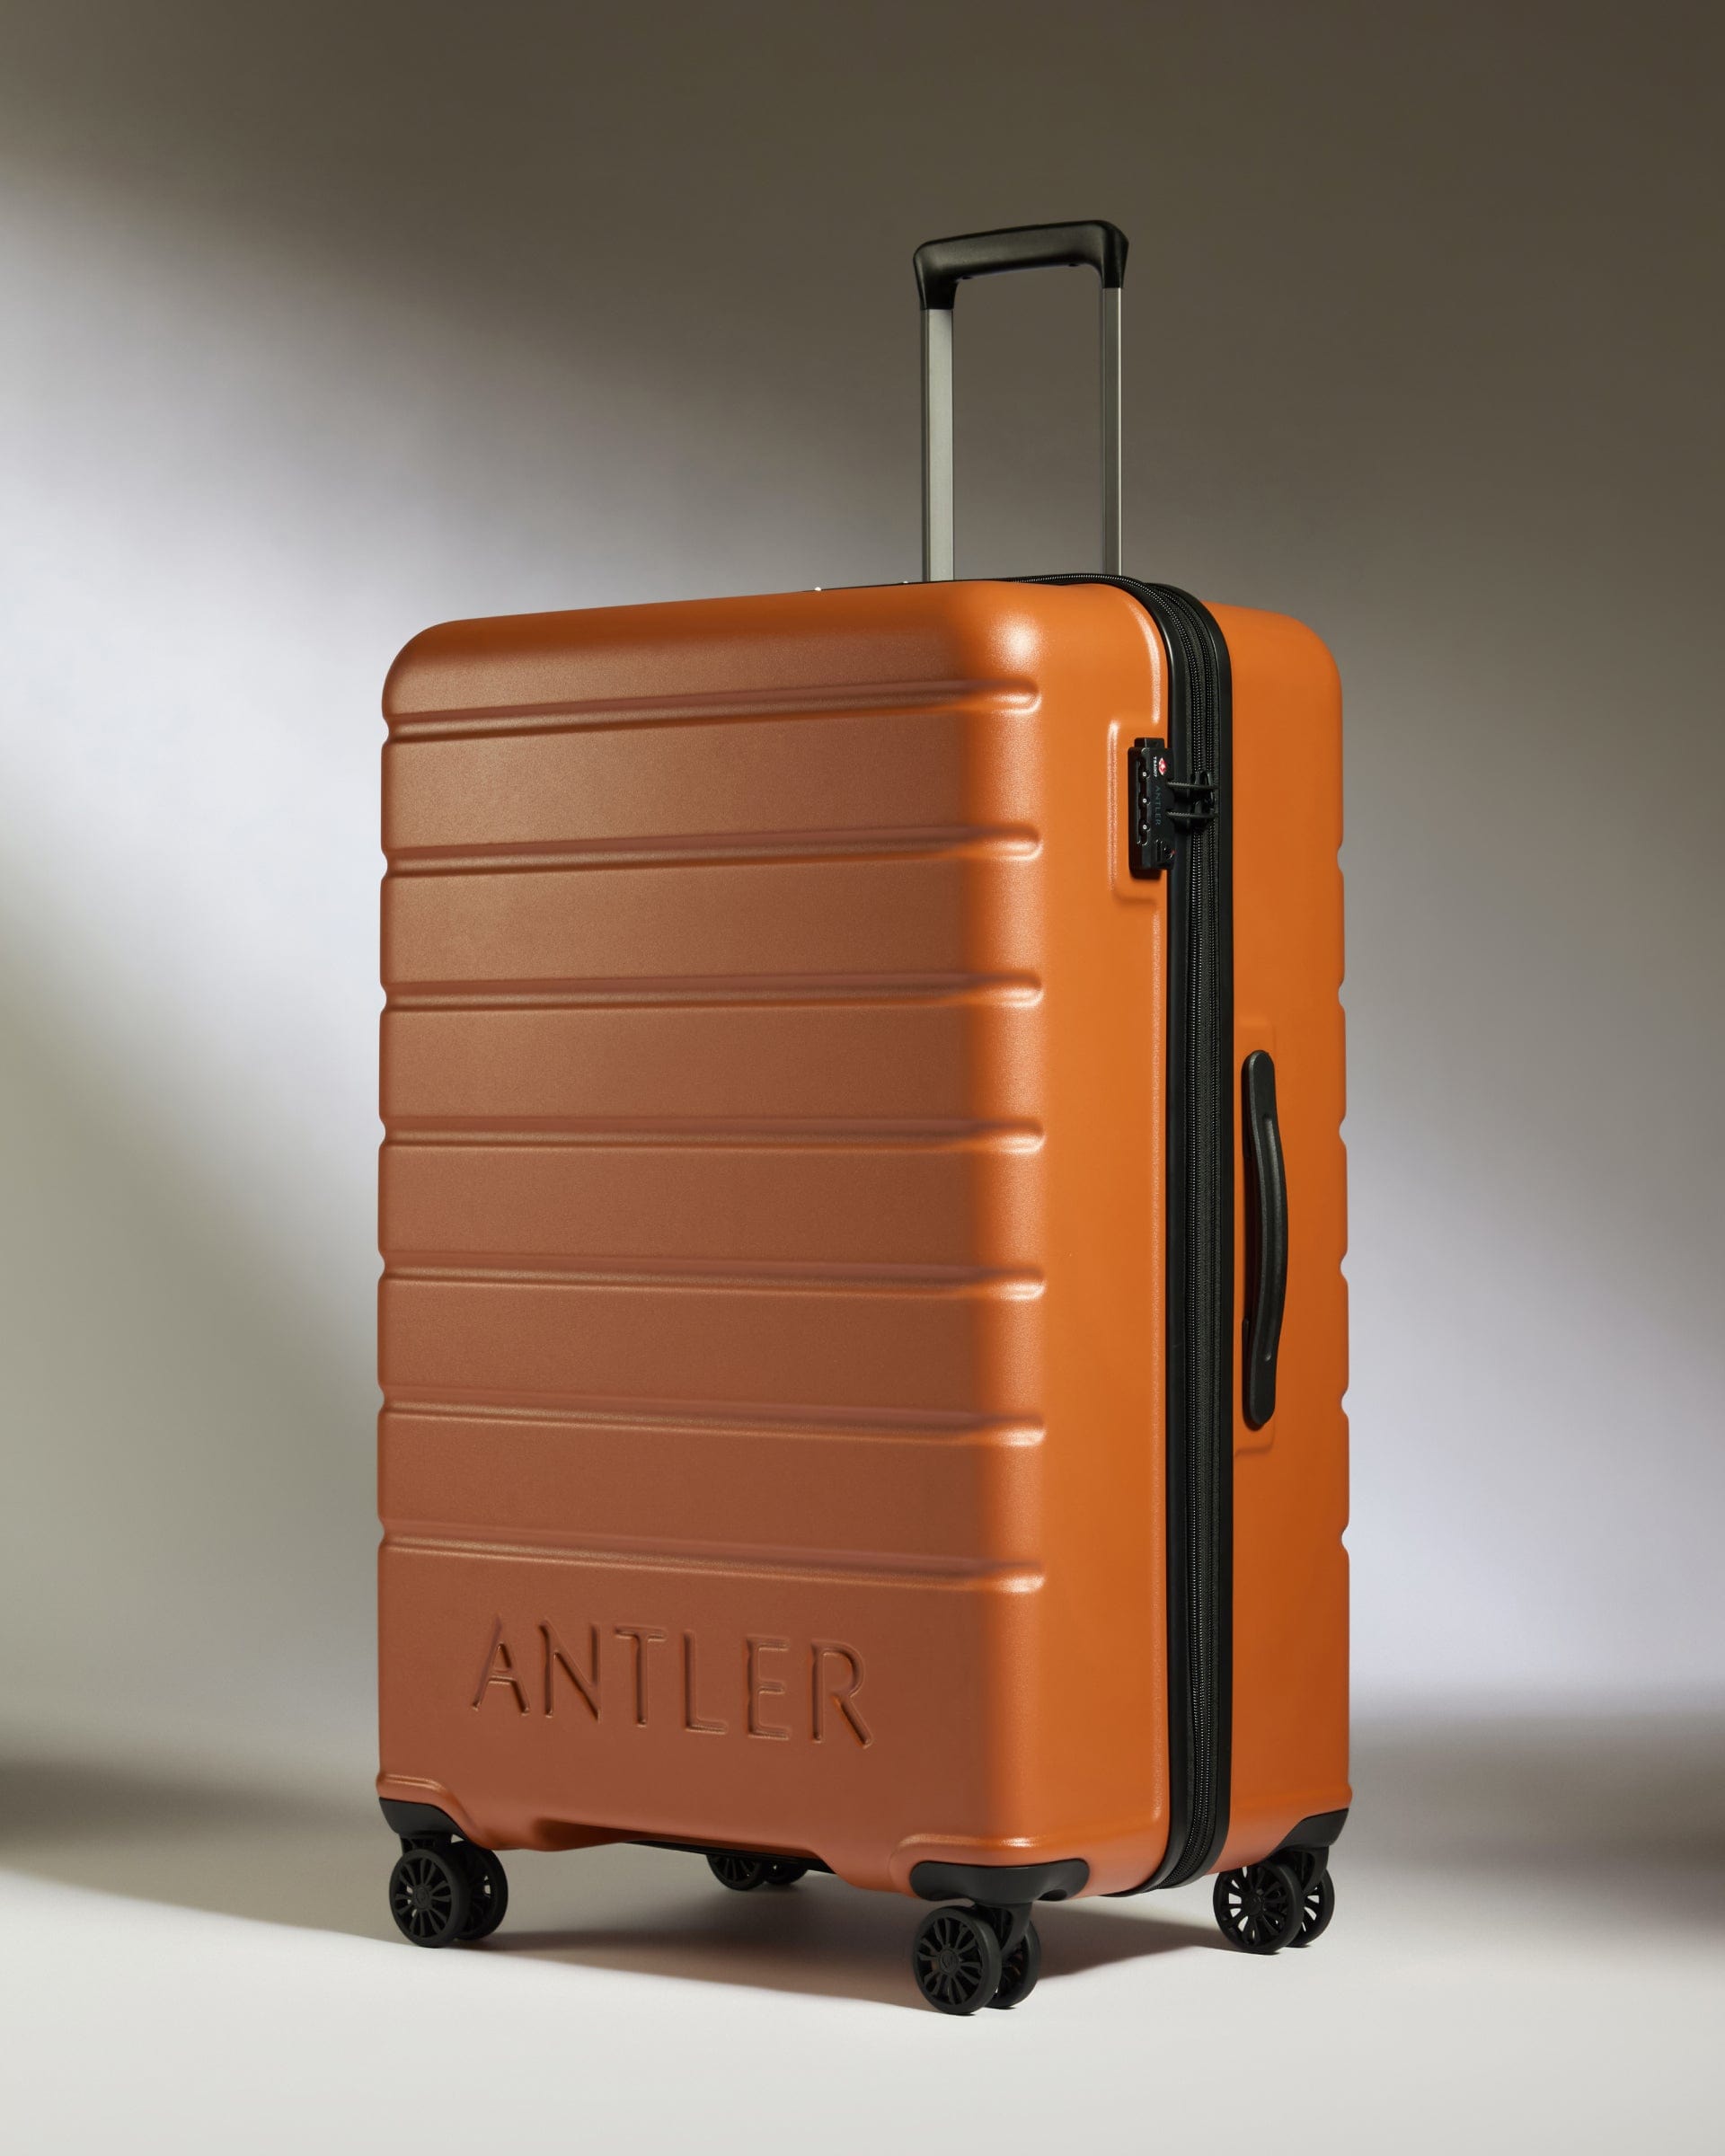 View Antler Logo Large Suitcase In Amber Size 355cm x 537cm x 81cm information